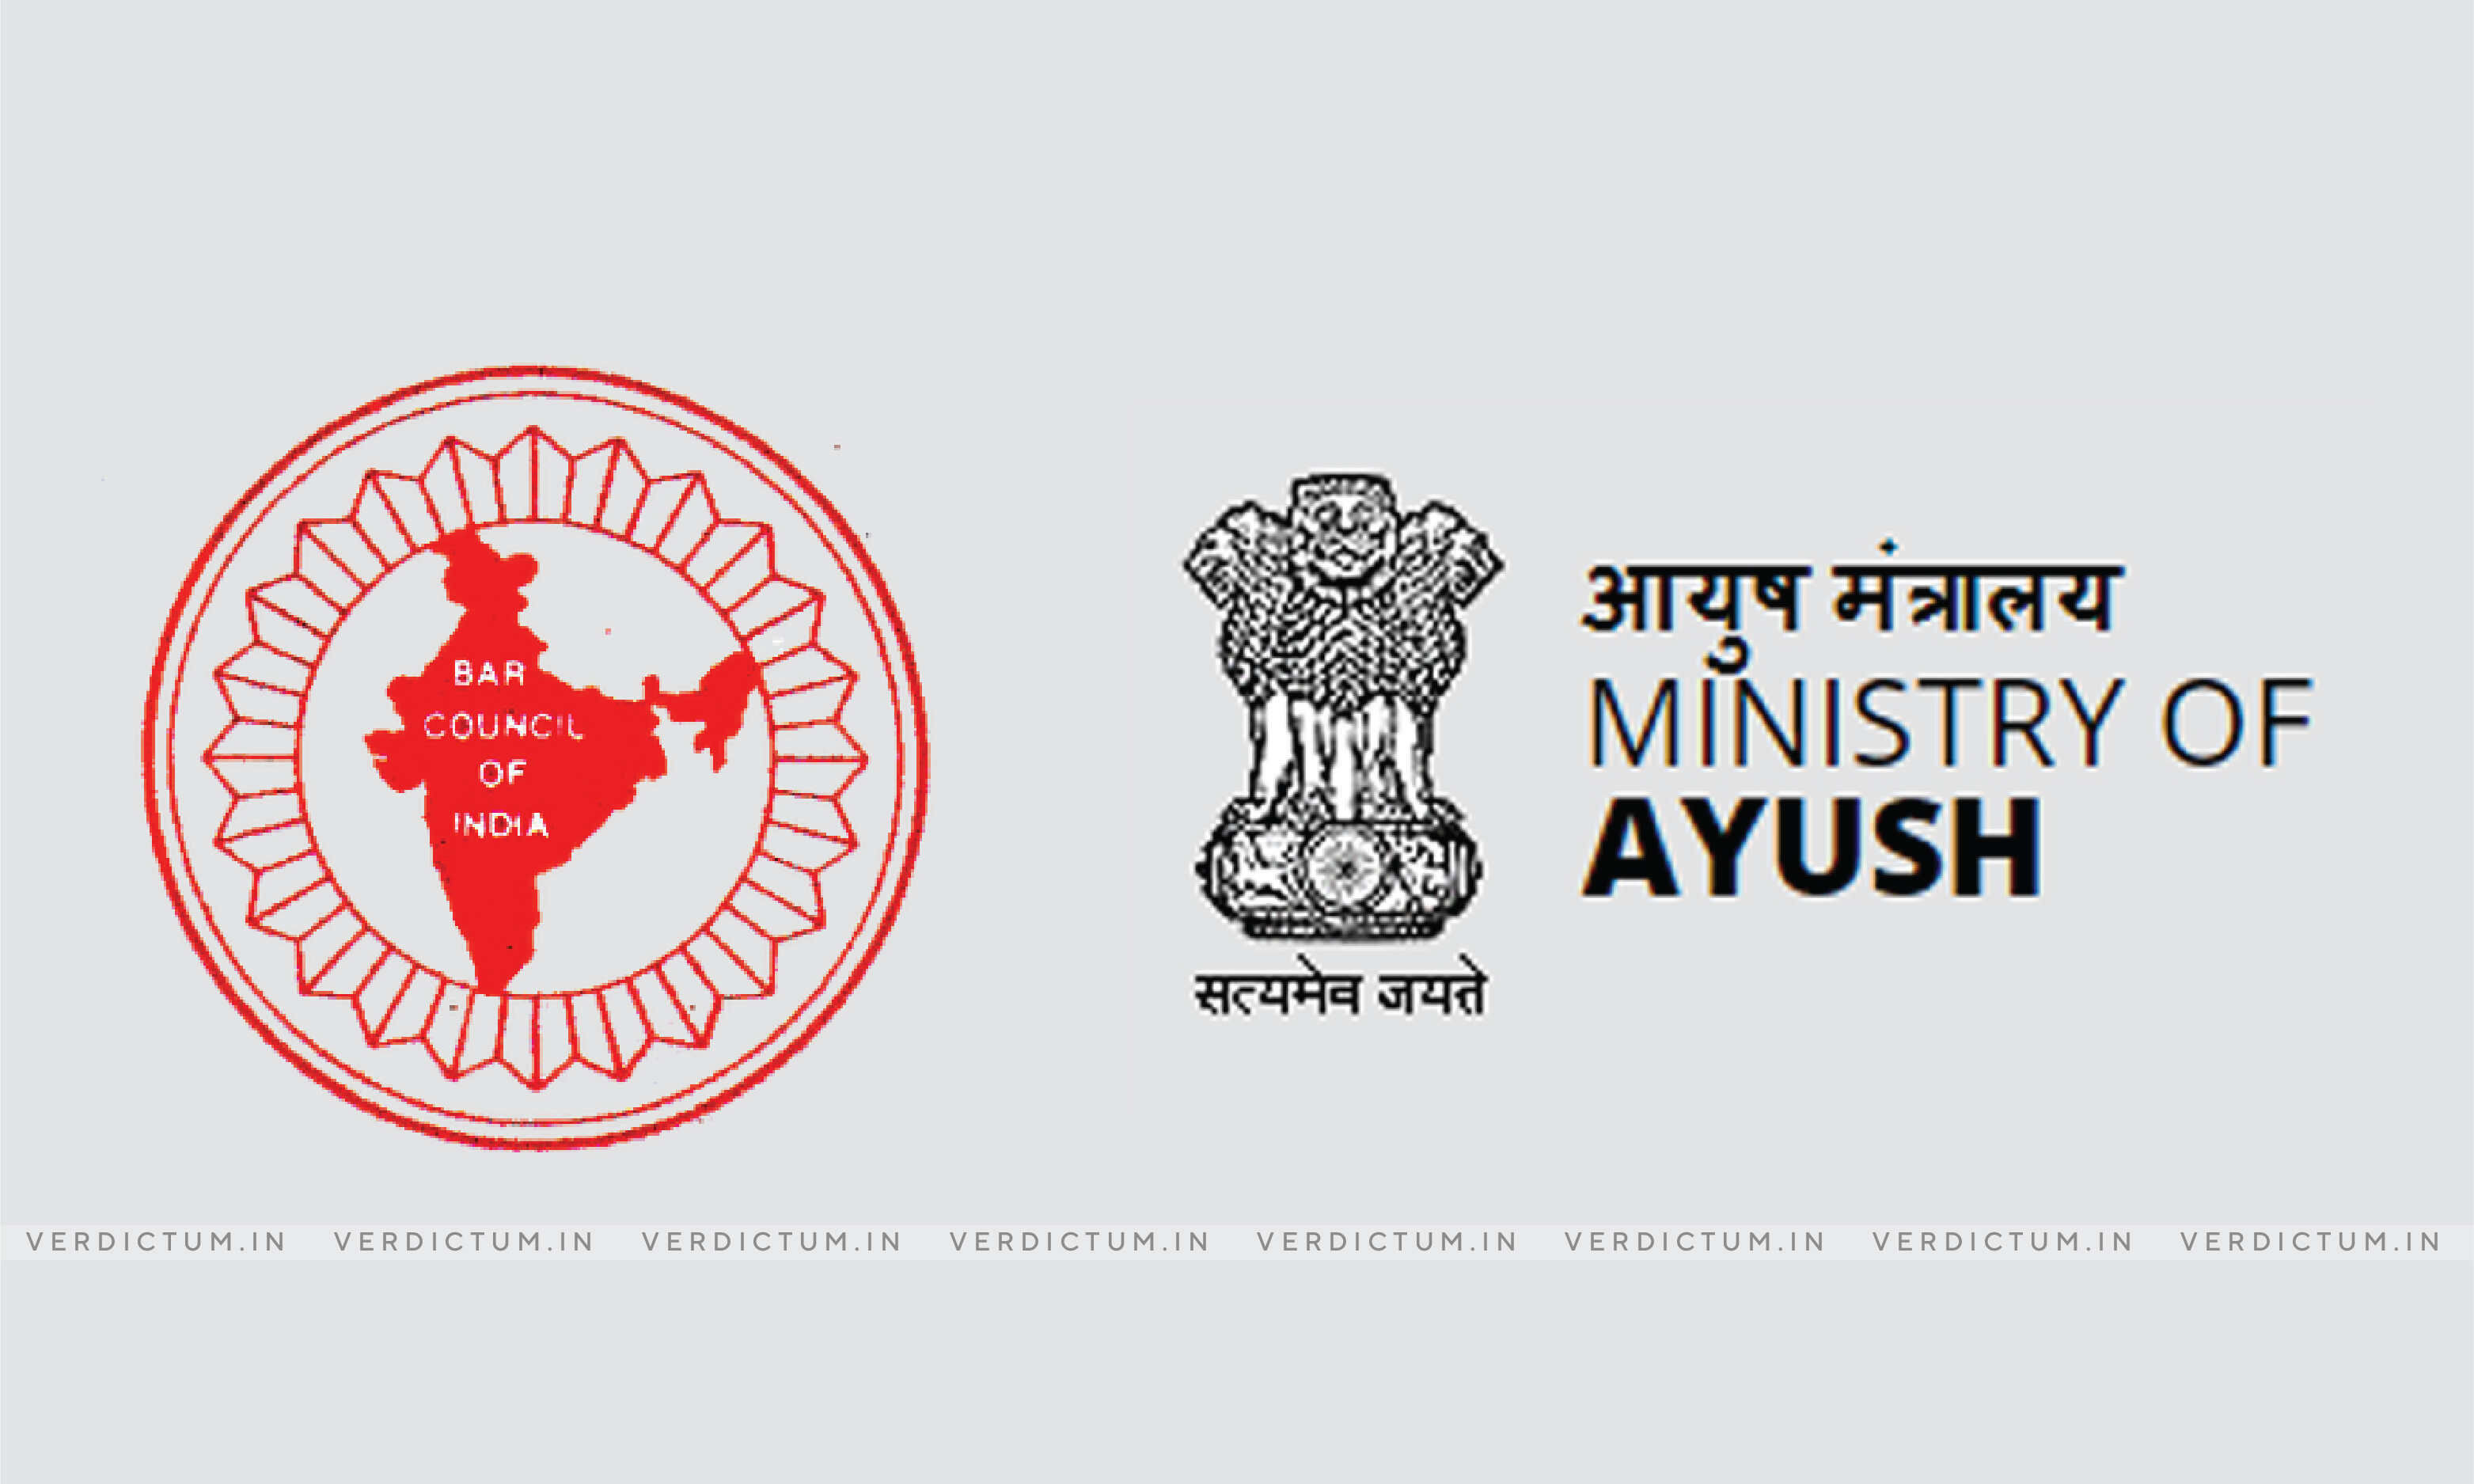 The Yoga Institute helps Ministry of Ayush with free distribution of AYUSH-64  - MediaBrief